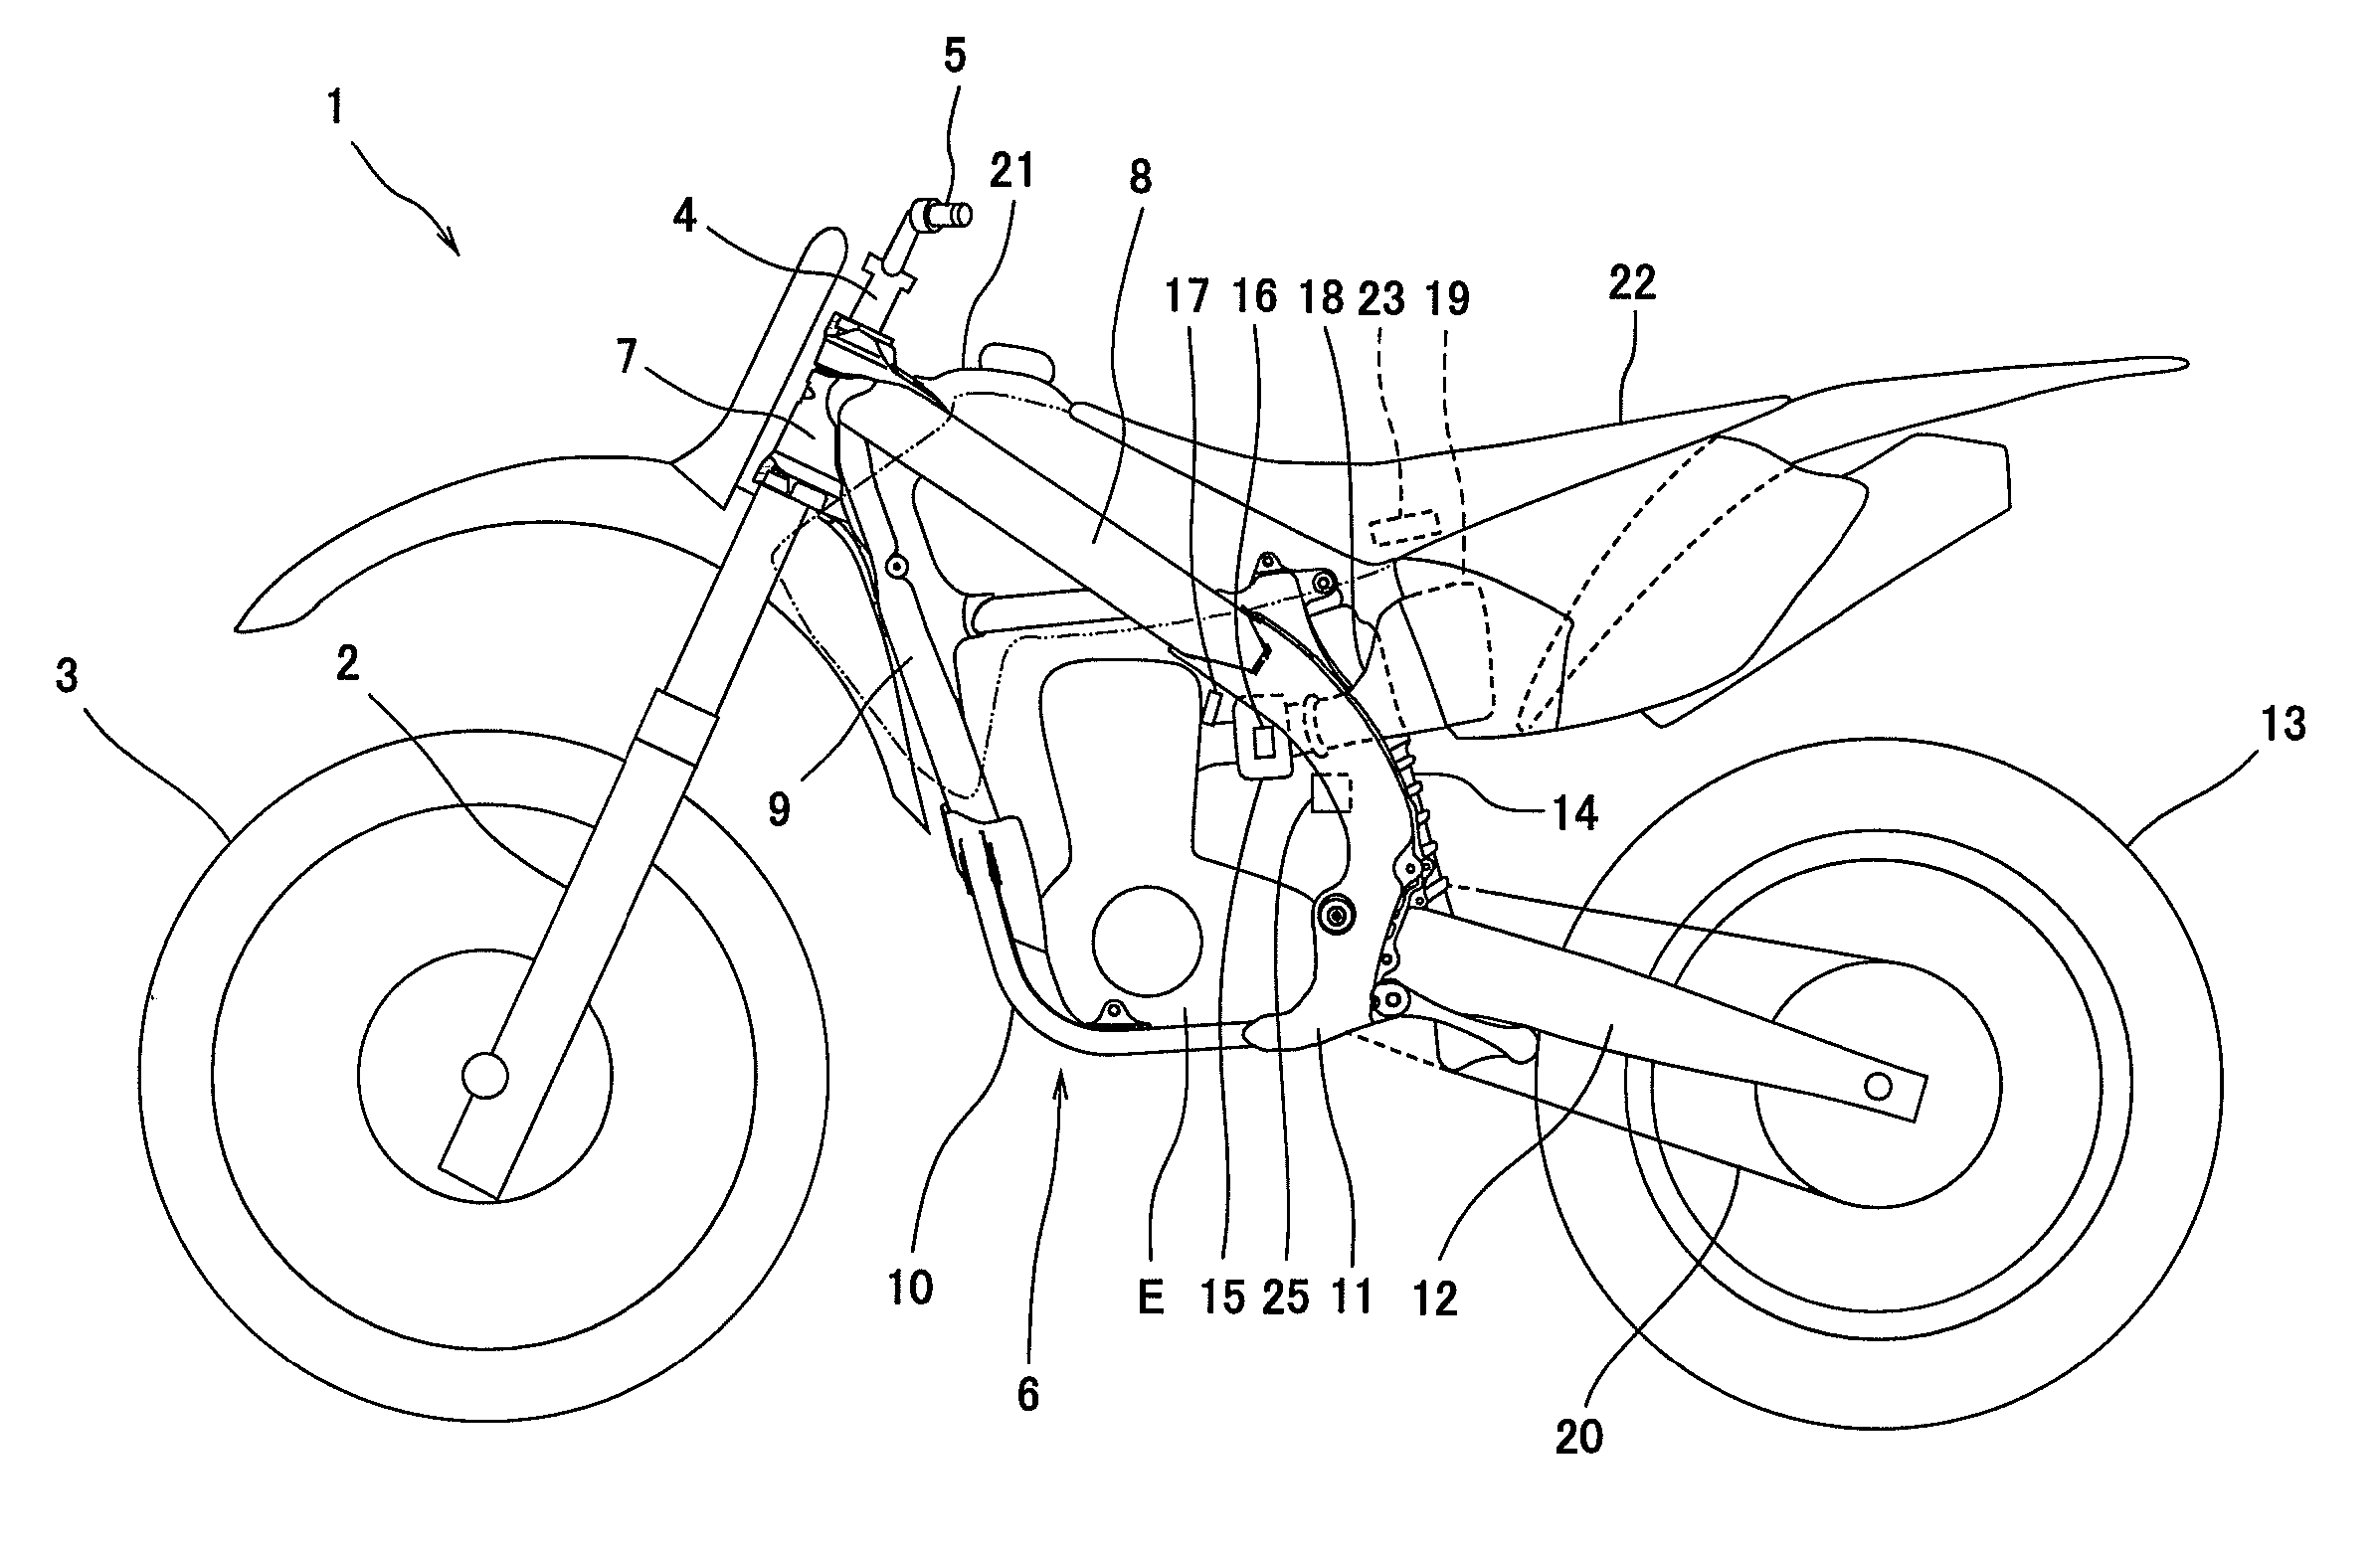 Vehicle and method of determining whether or not to stop engine mounted in vehicle